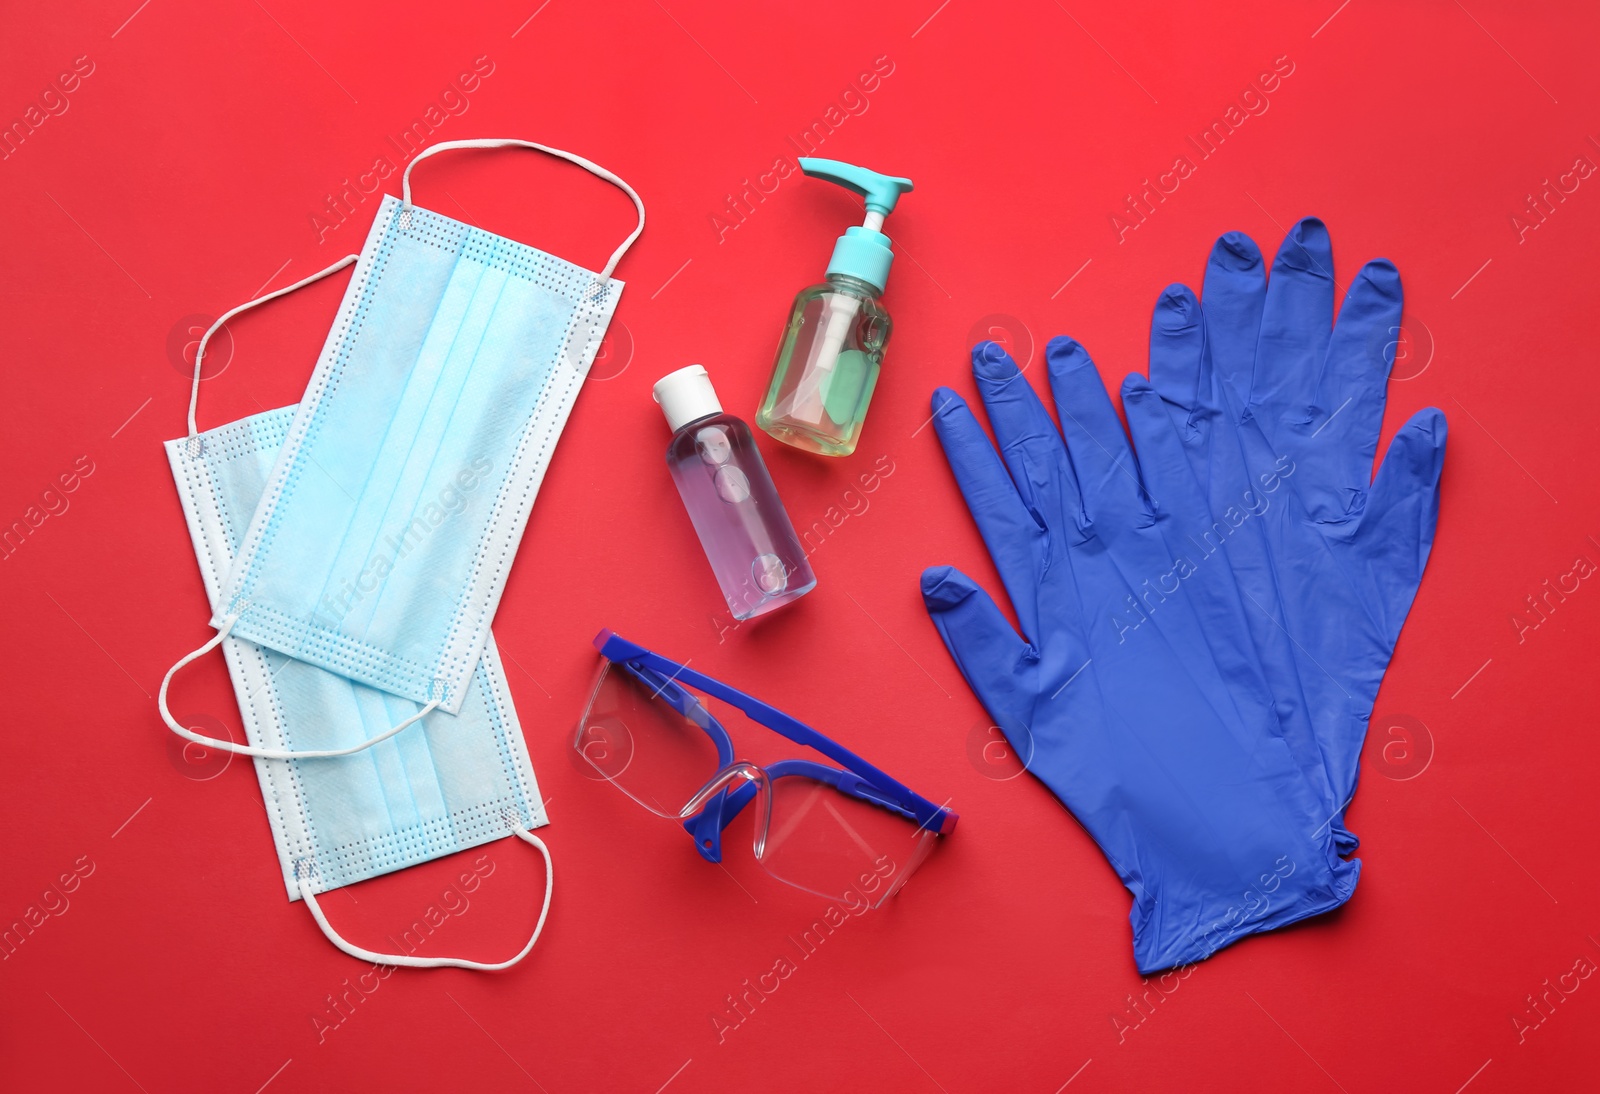 Photo of Flat lay composition with medical gloves, masks and hand sanitizers on red background